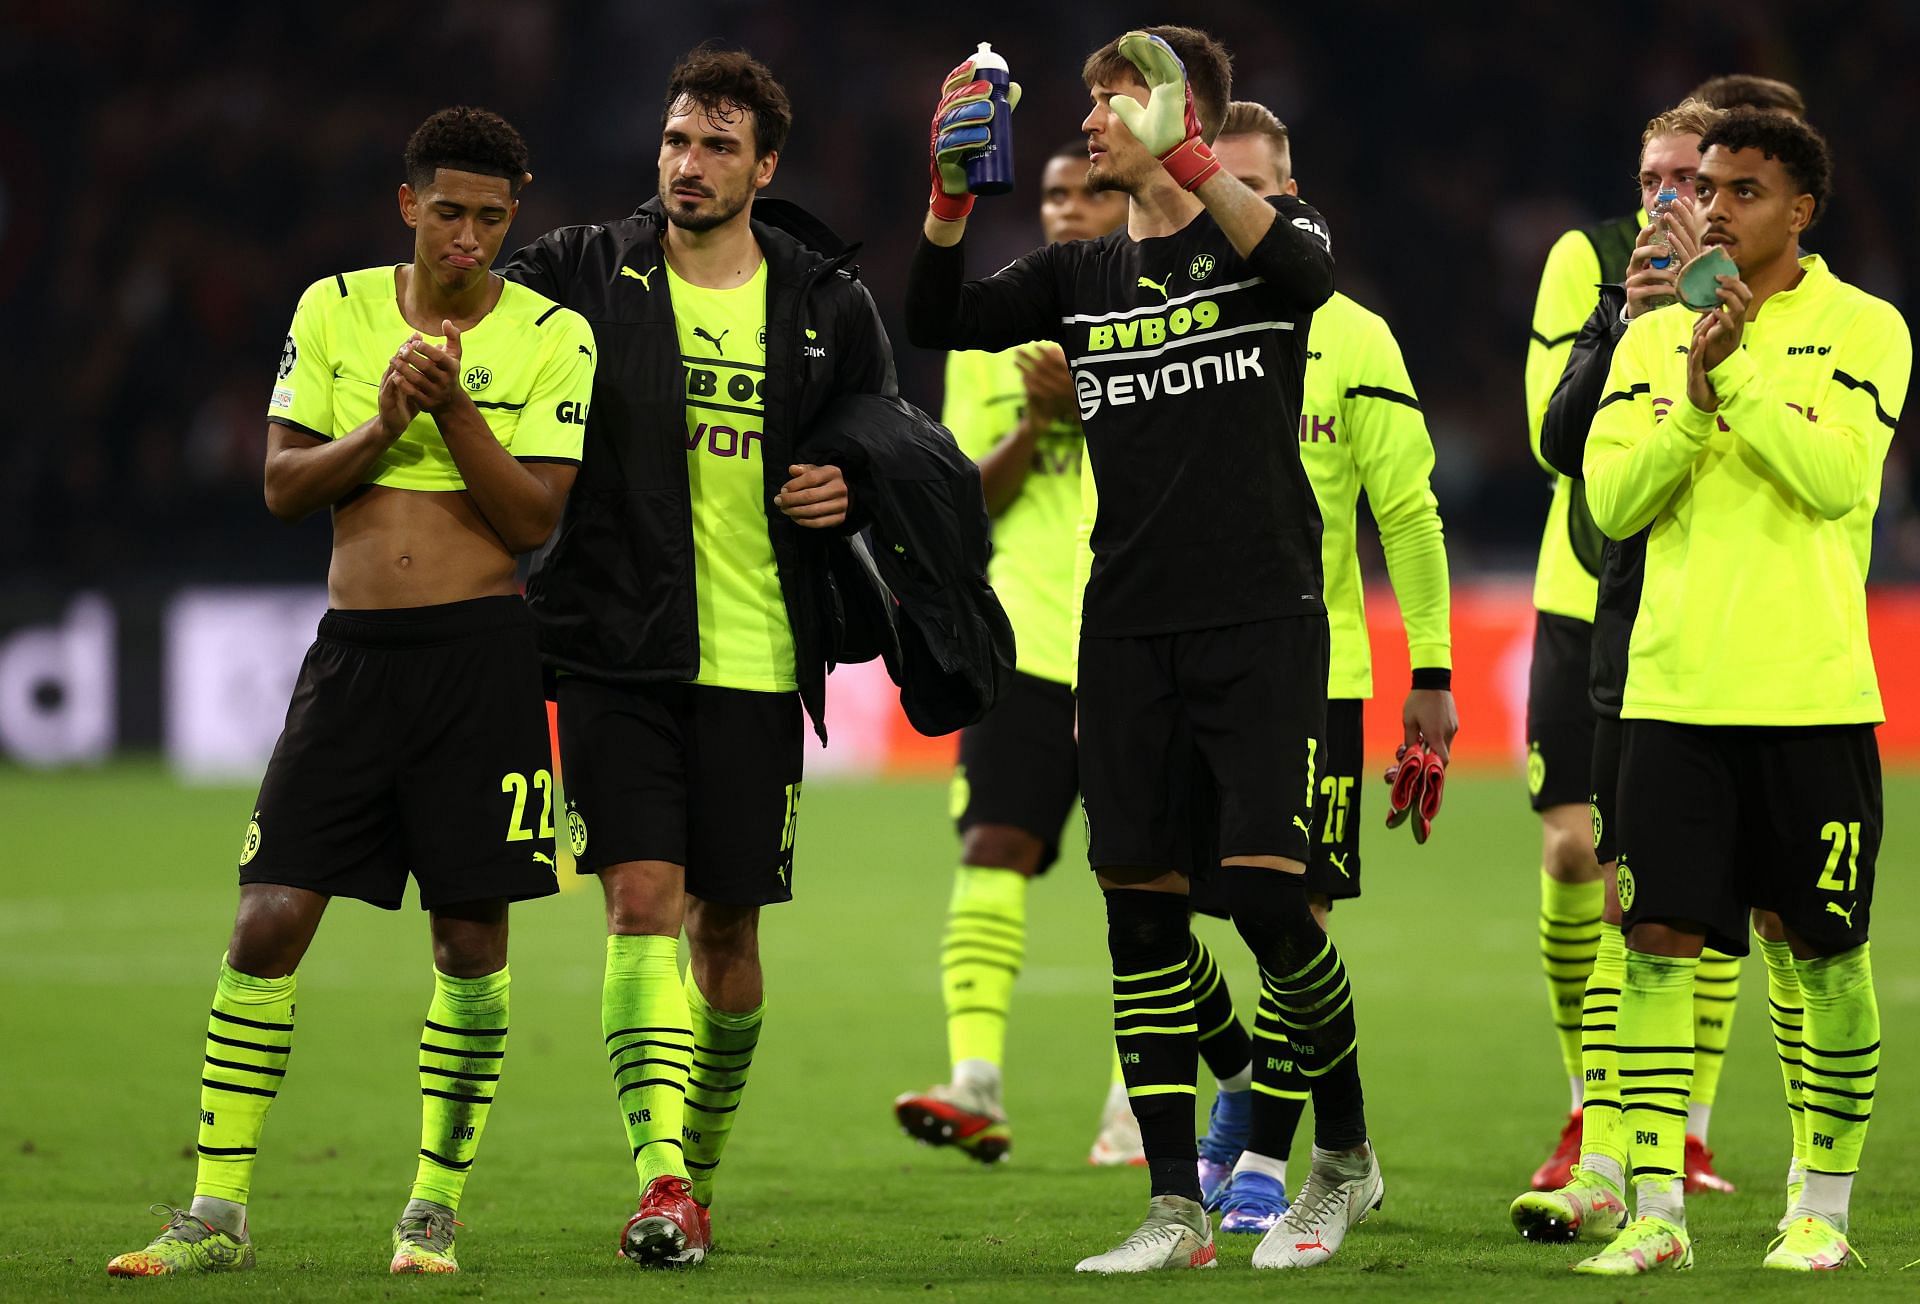 Borussia Dortmund suffered their heaviest Champions League defeat in Amsterdam on Tuesday.